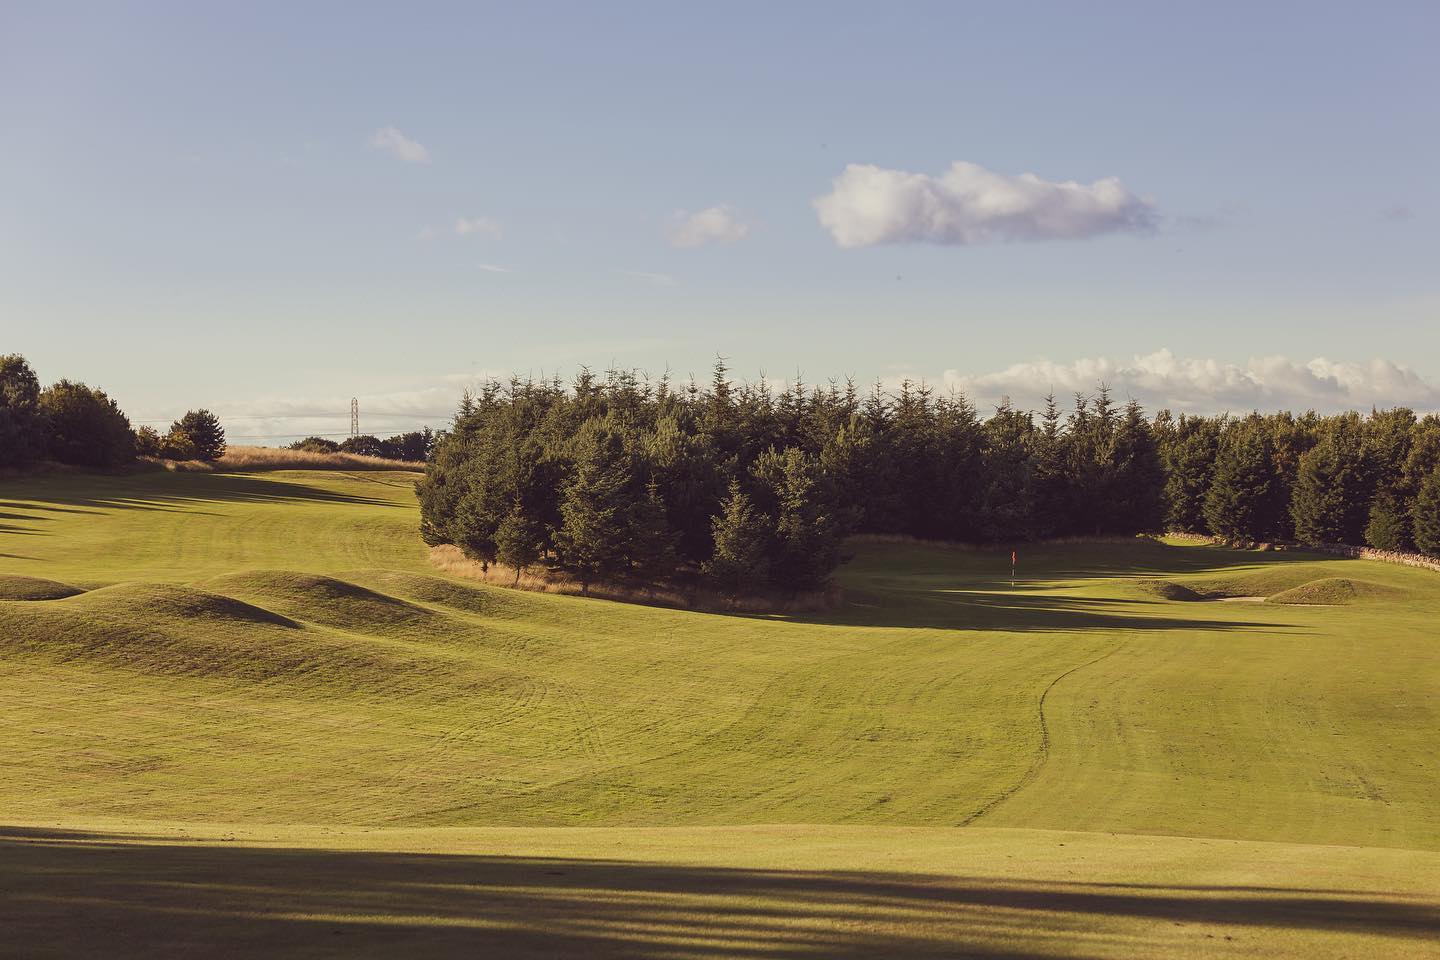 Kings Acre Golf Course - as recommended by Your Golfer Magazine